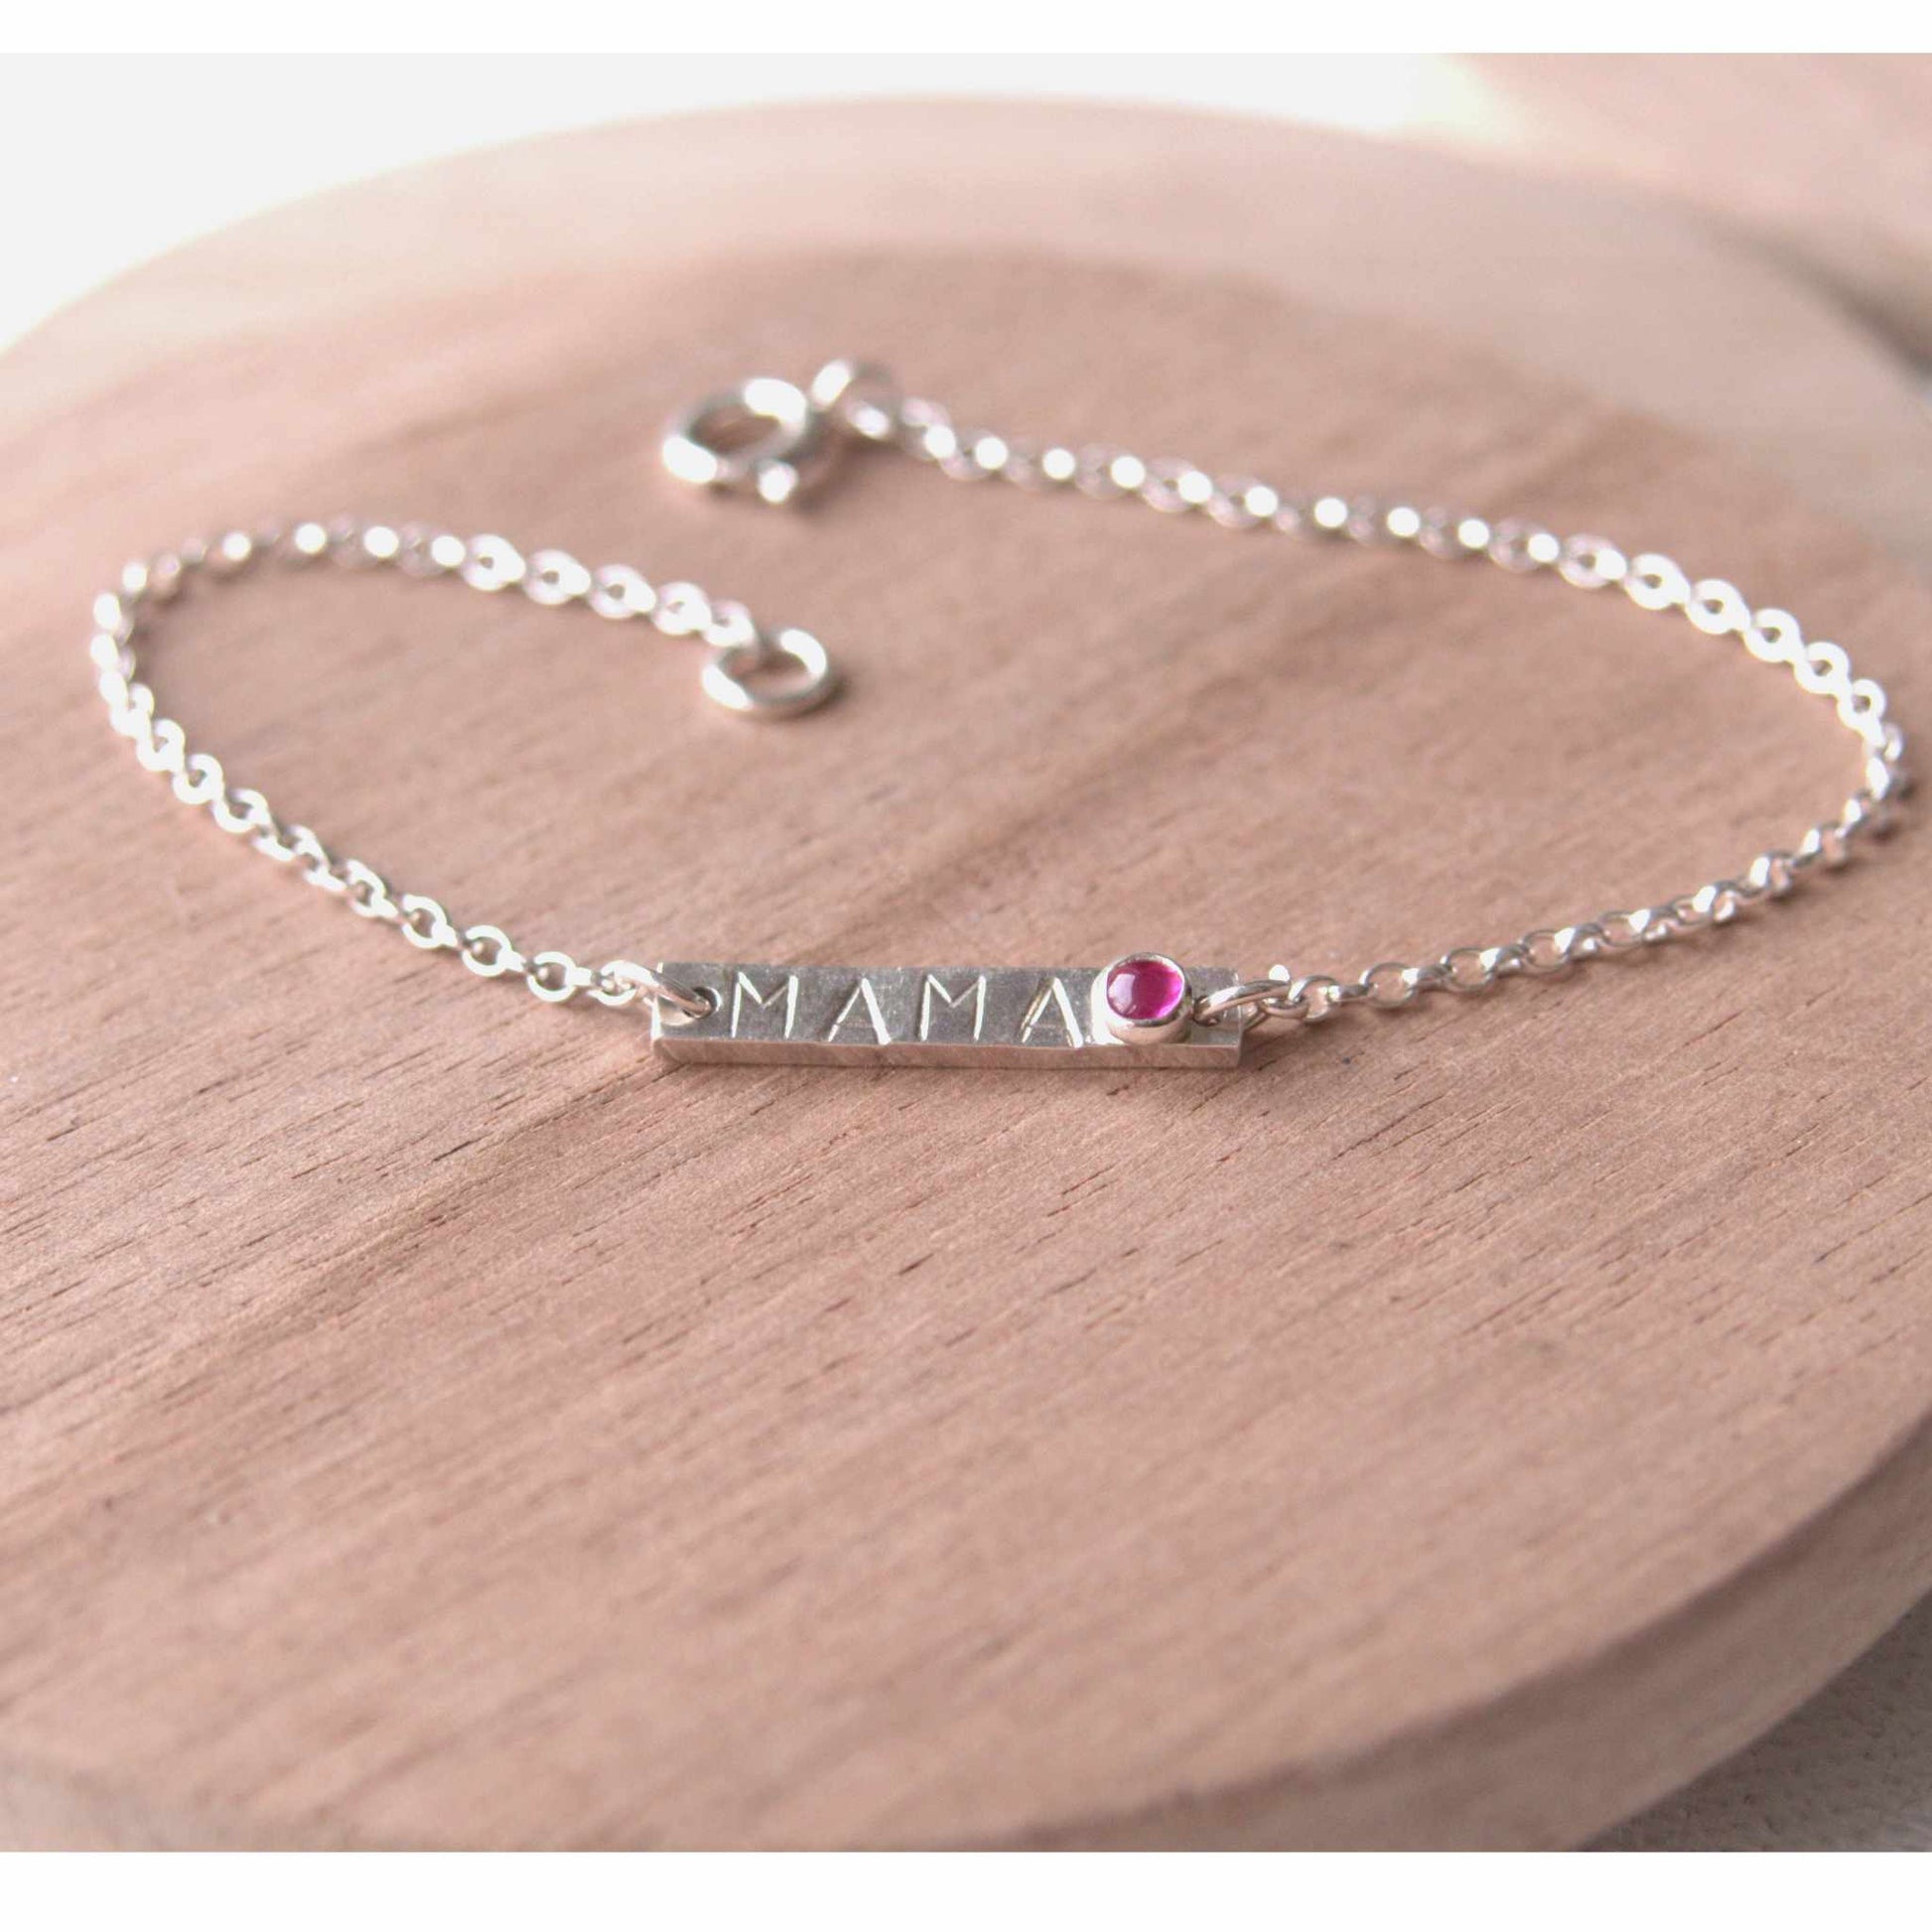 Silver Bar bracelet with hand stamped MAMA with a baby birthstone in July Lab Ruby. Handmade by maram jewellery in Scotland UK